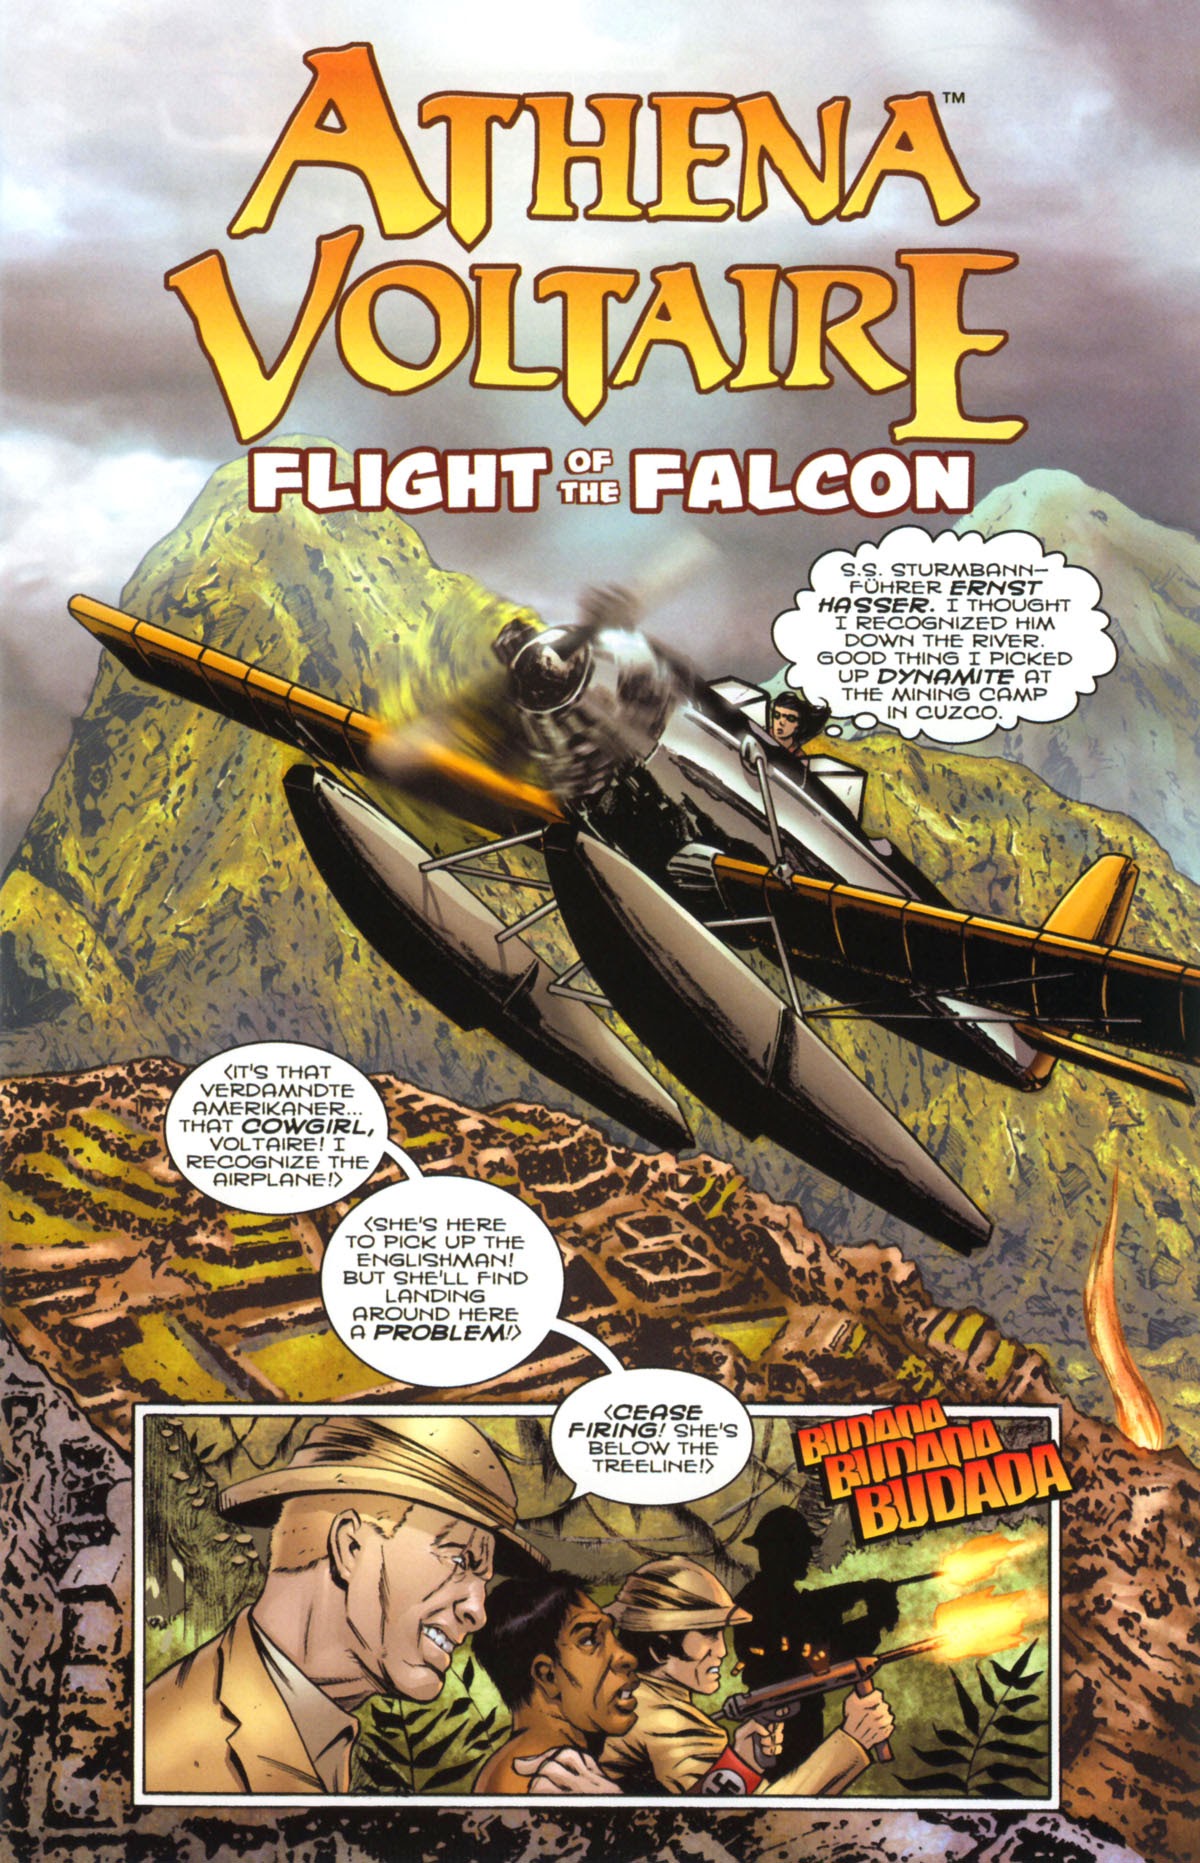 Read online Athena Voltaire Flight of the Falcon comic -  Issue #1 - 5